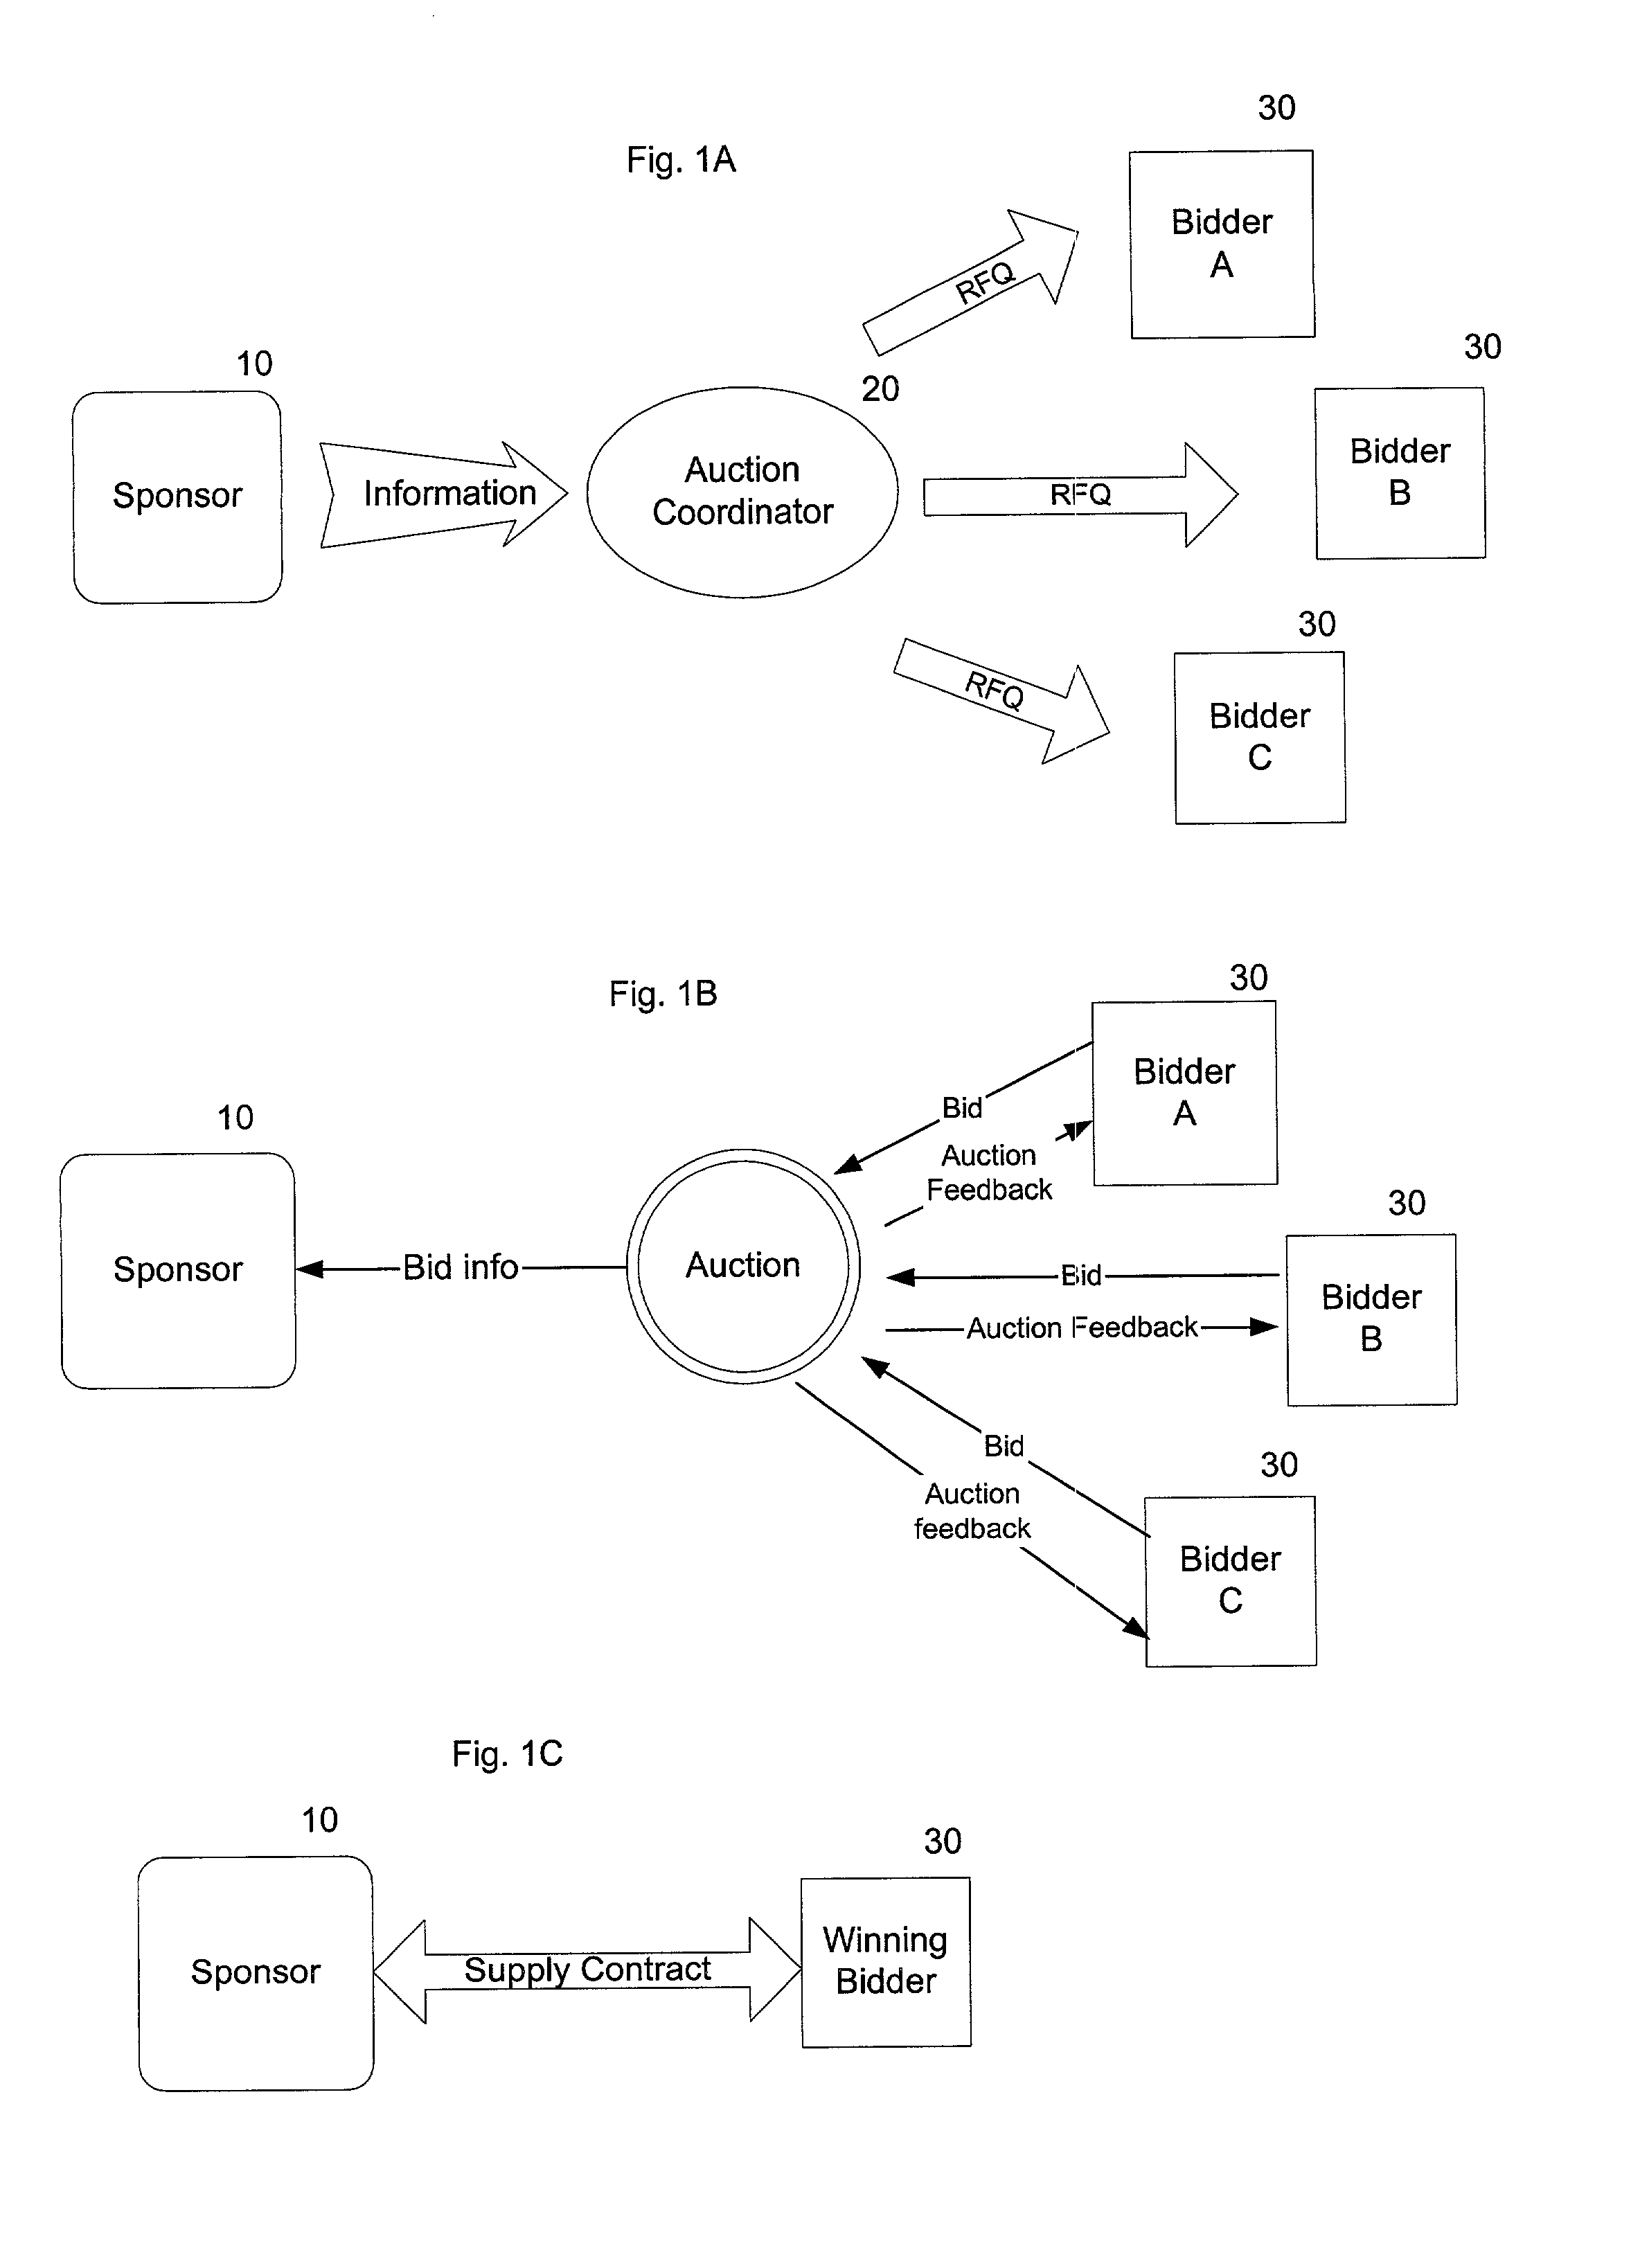 Method, apparatus, and system for varying an award volume in an auction